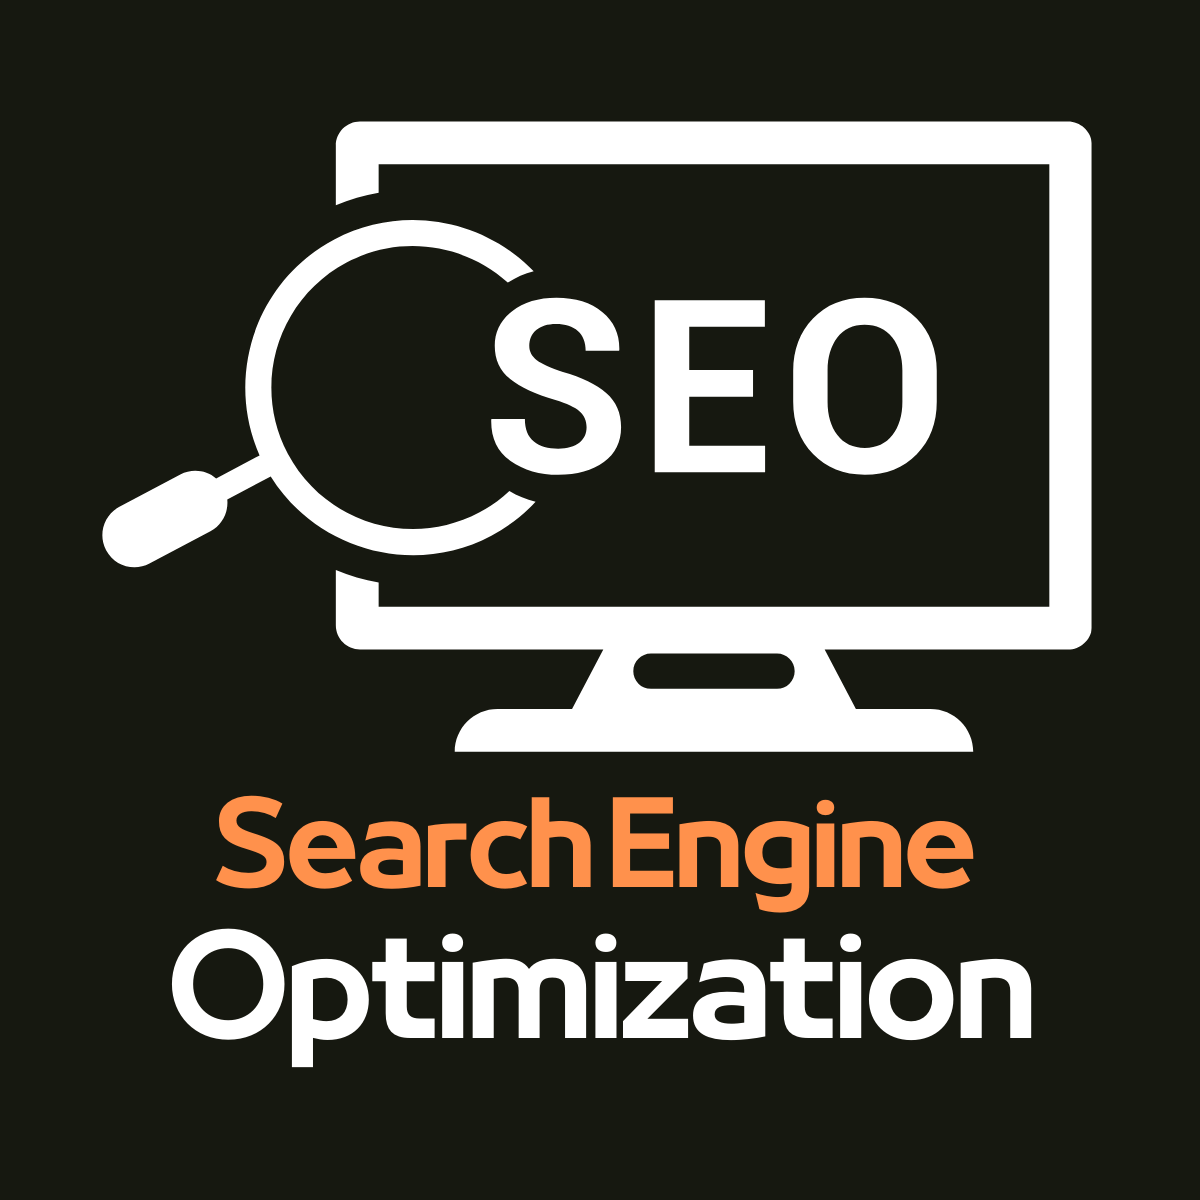 Top Search Engine Optimization Company: Get More Traffic